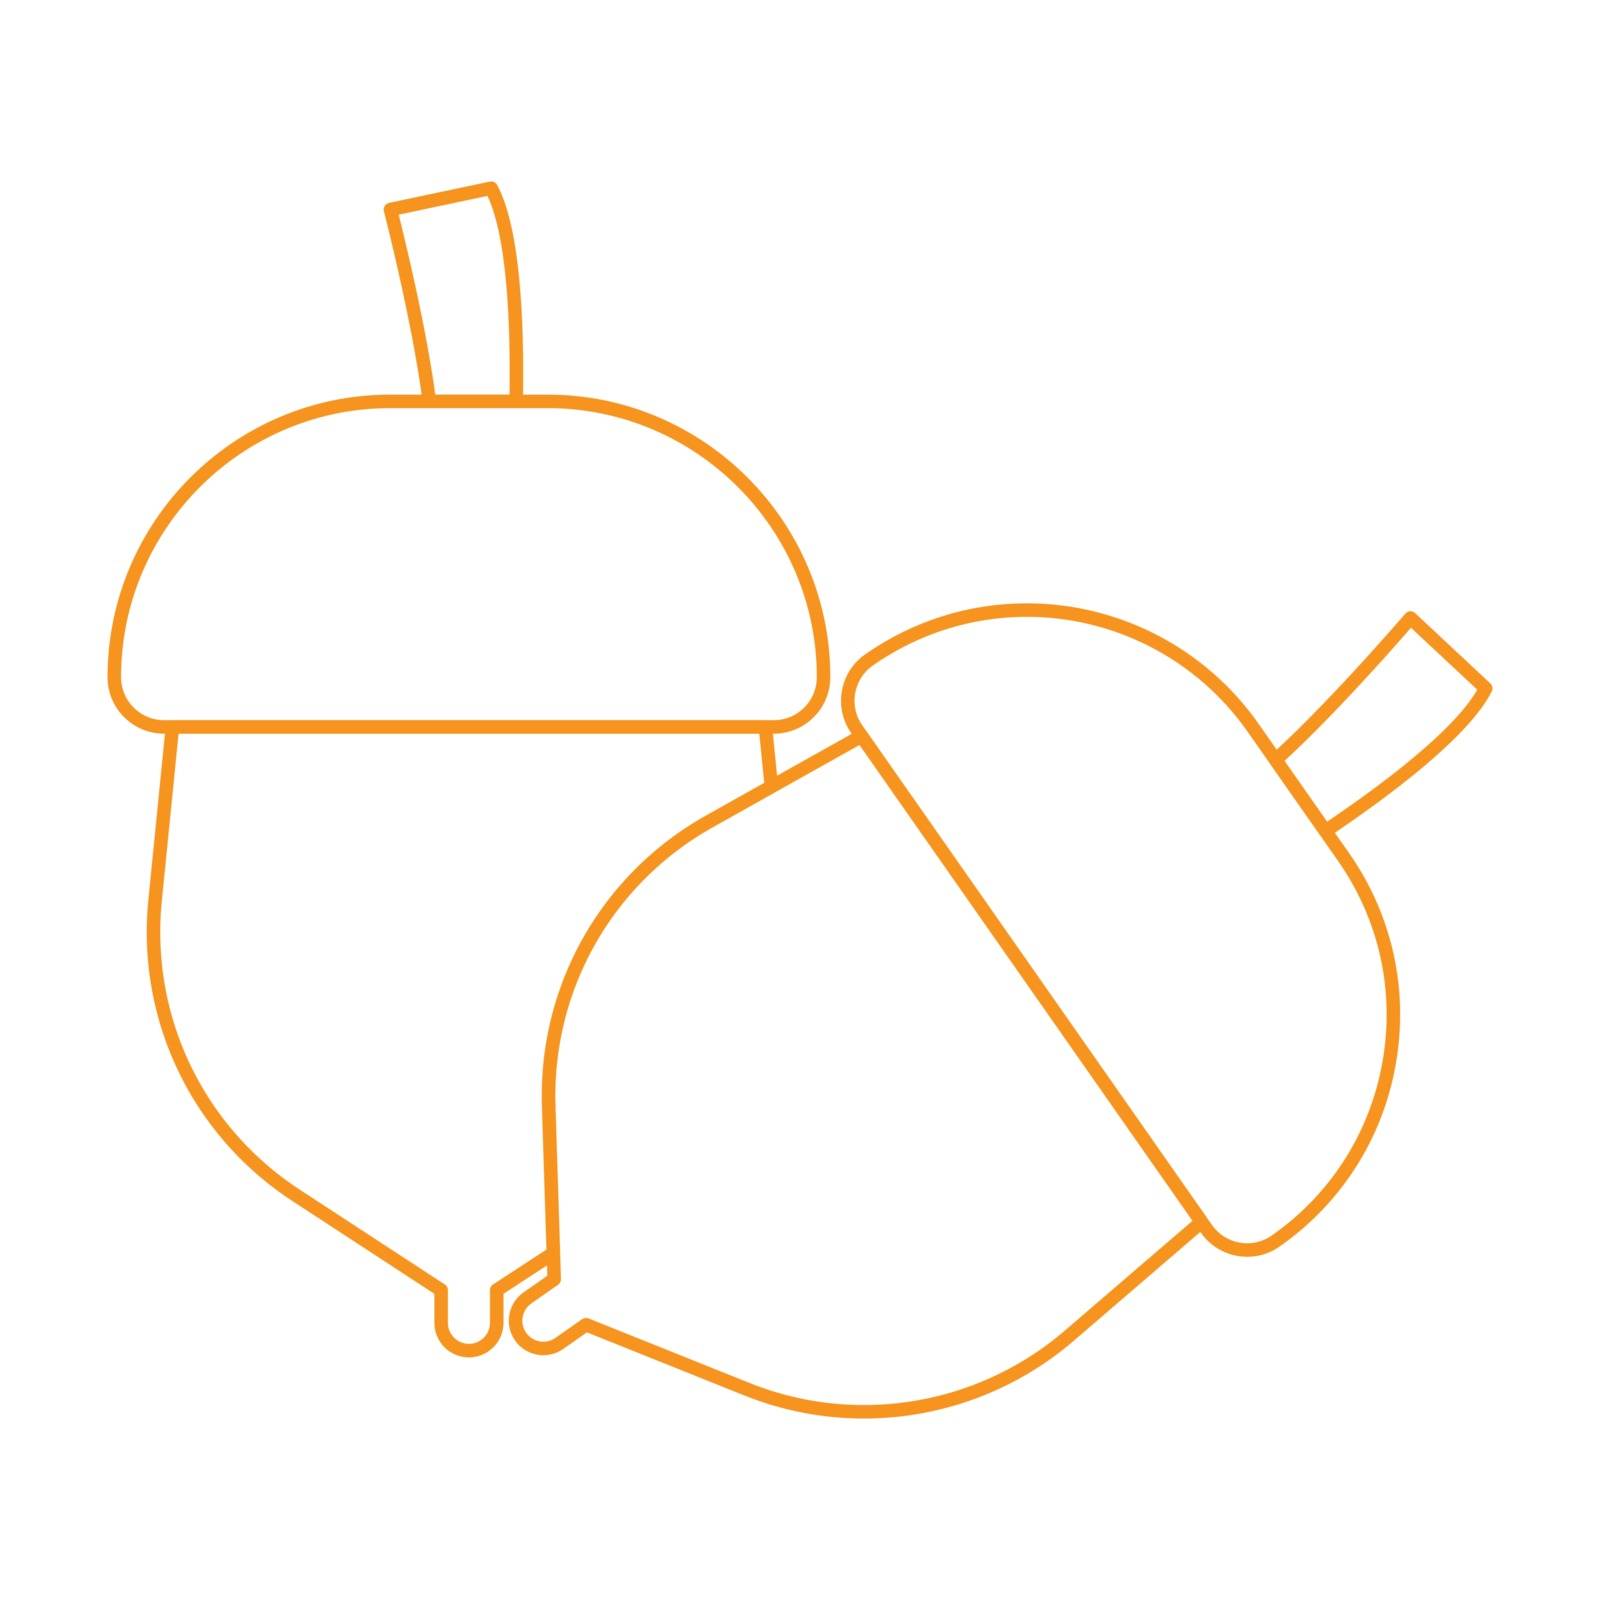 Thin line acorn icon by ang_bay